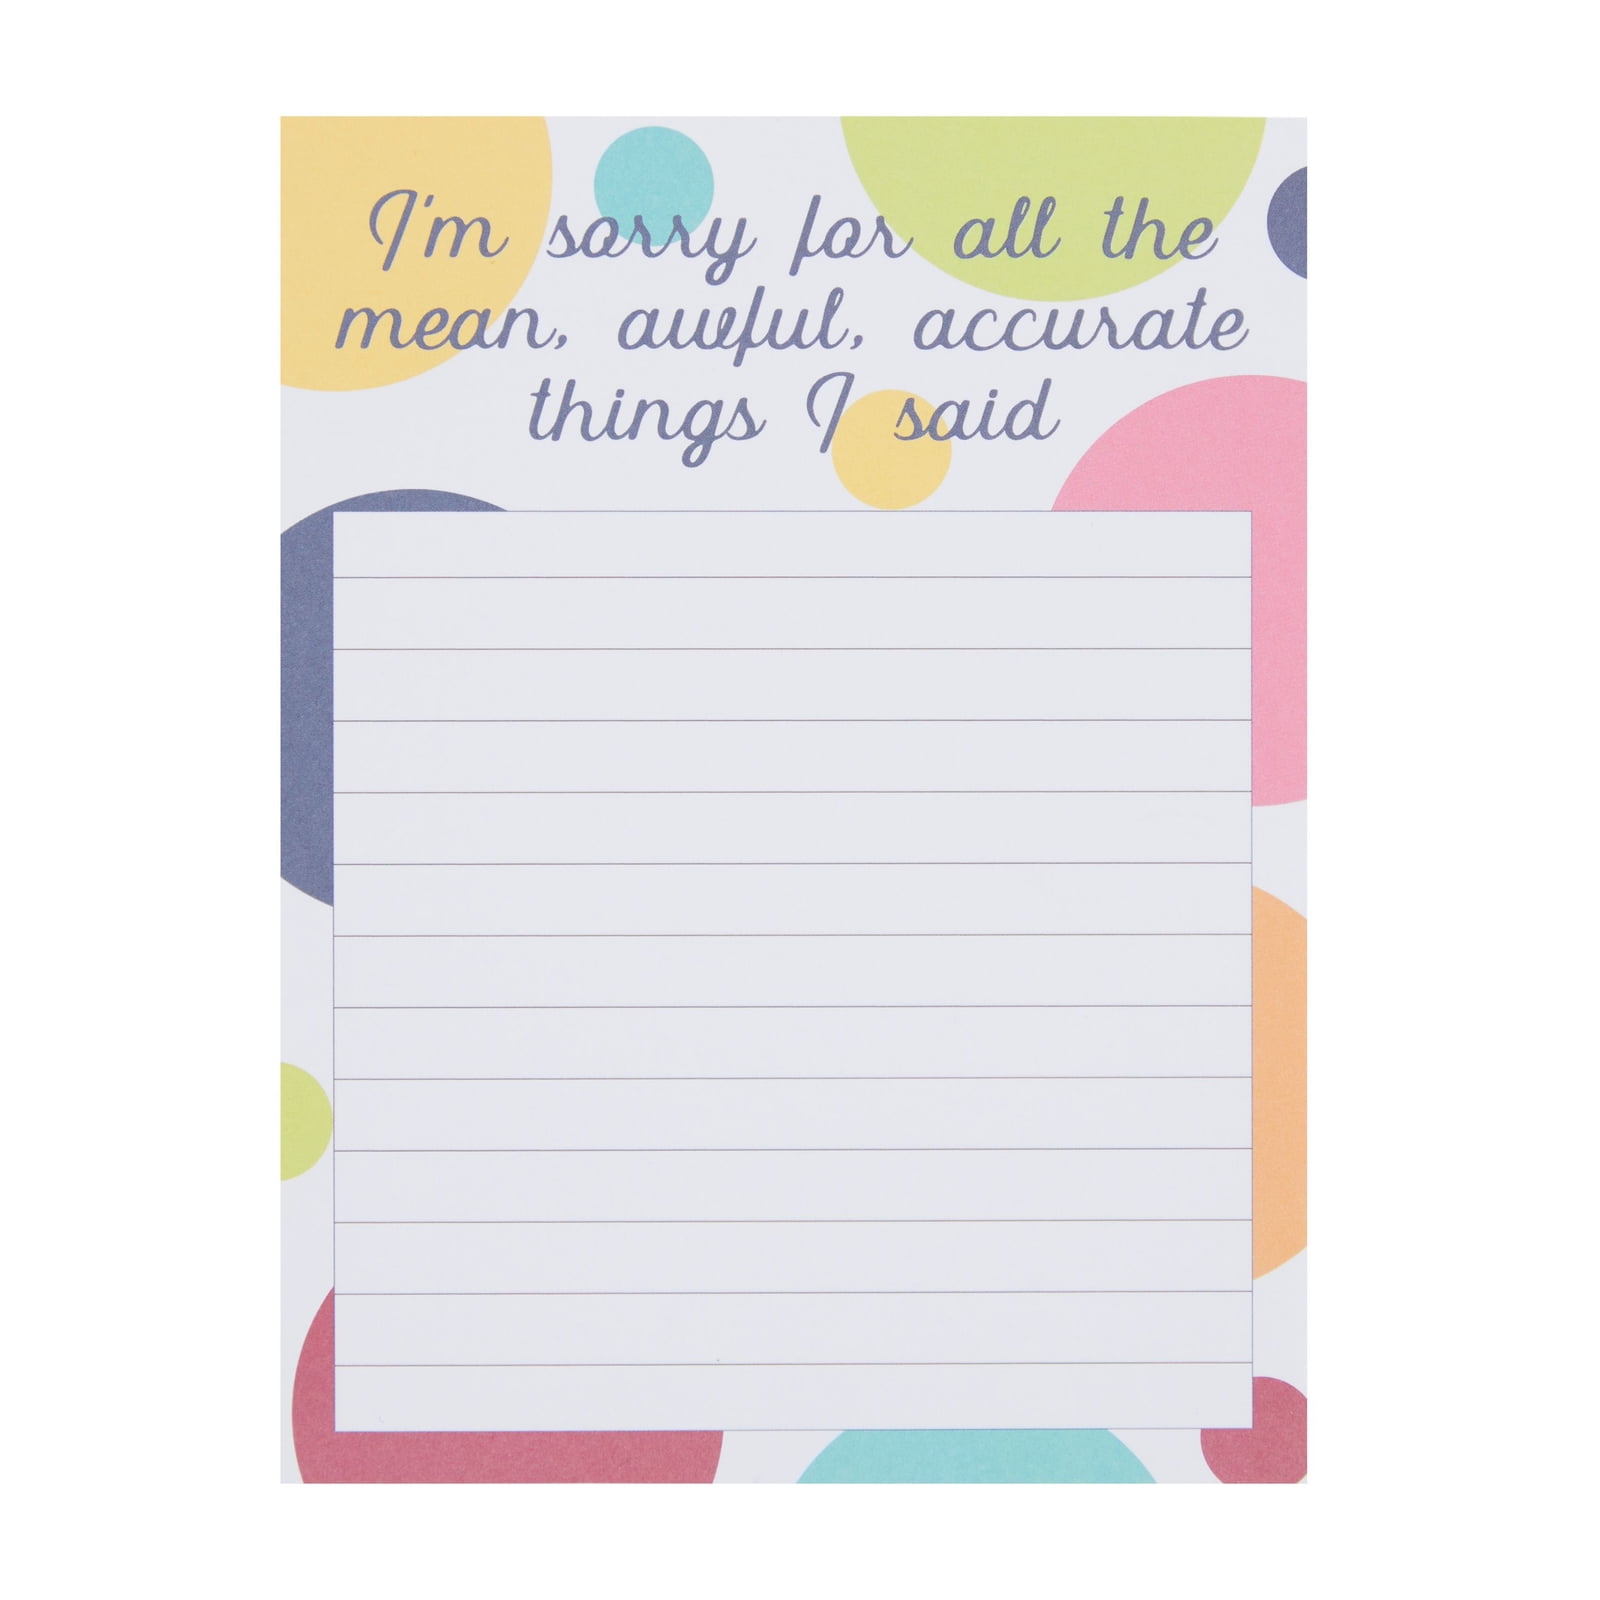 4 Pack Funny Work Notepads for Office and School, Novelty Gifts, 4 x 5.2 in